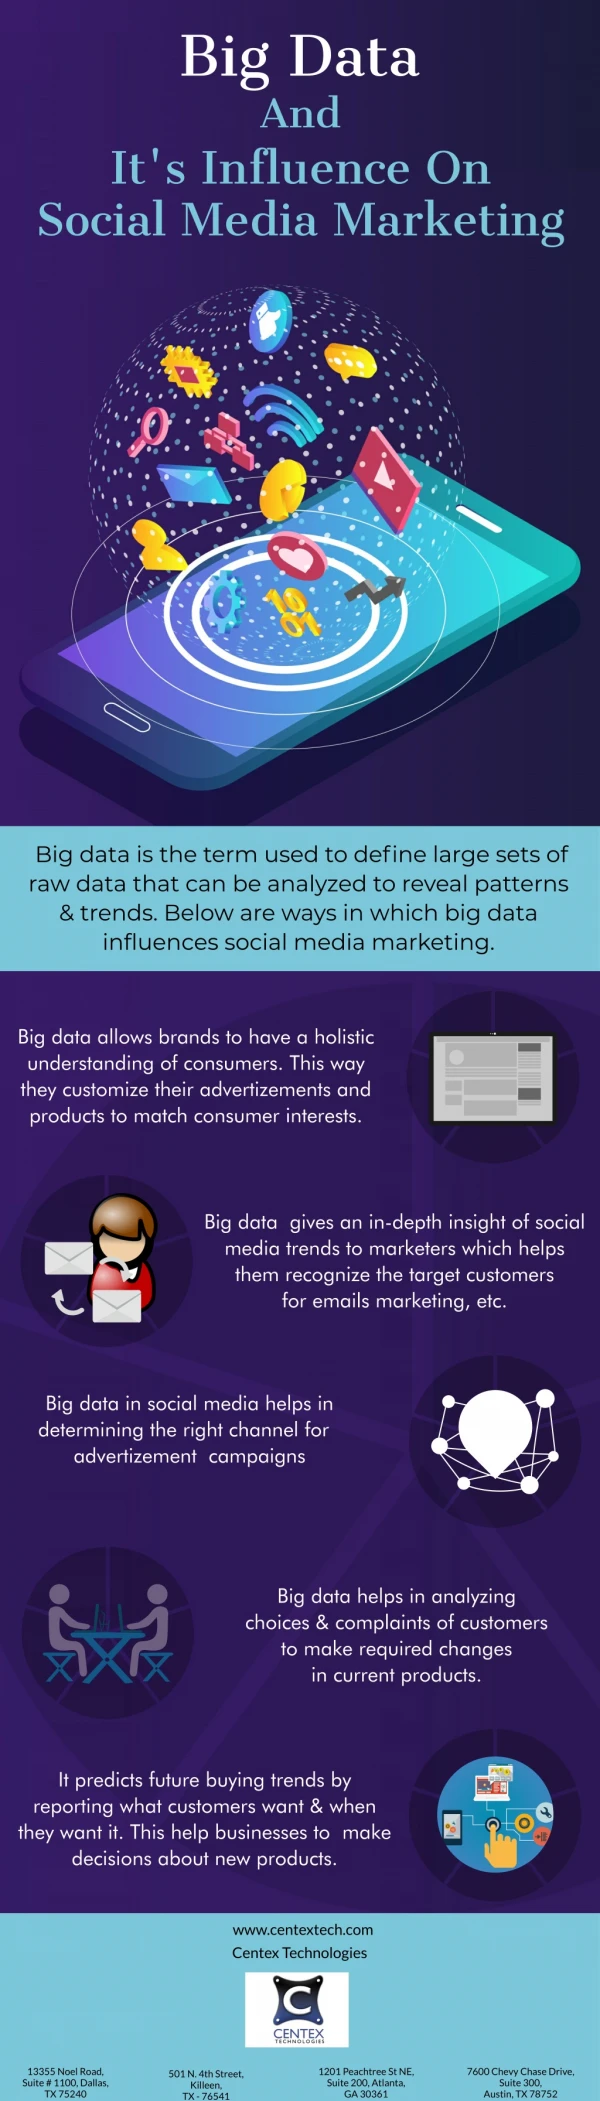 Big Data And It's Influence On Social Media Marketing